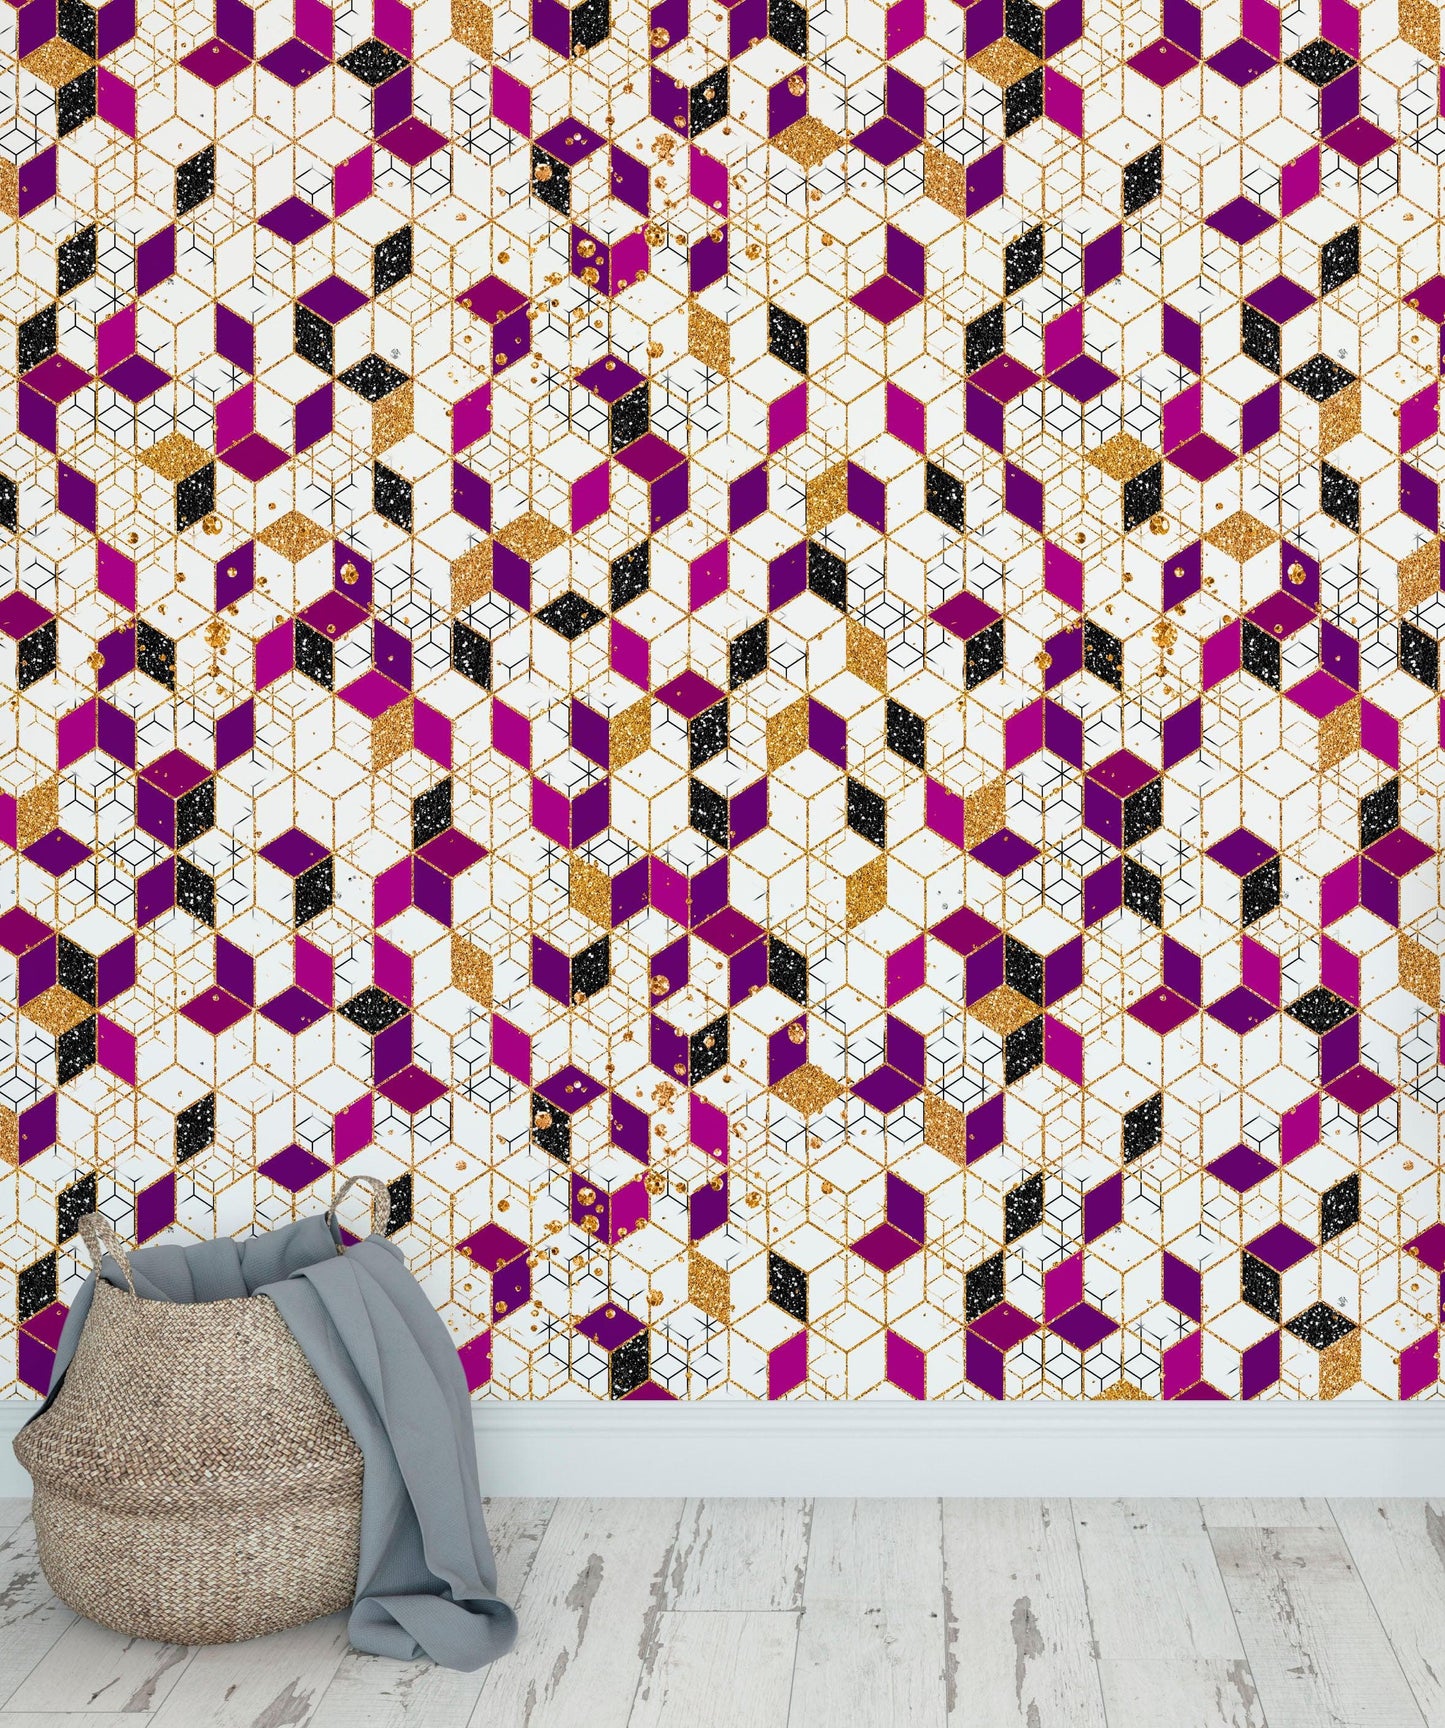 Abstract 3D Cube Shape Wall Mural. Geometric Cube Minimalistic Purple and Gold Peel and Stick Wallpaper. #6380